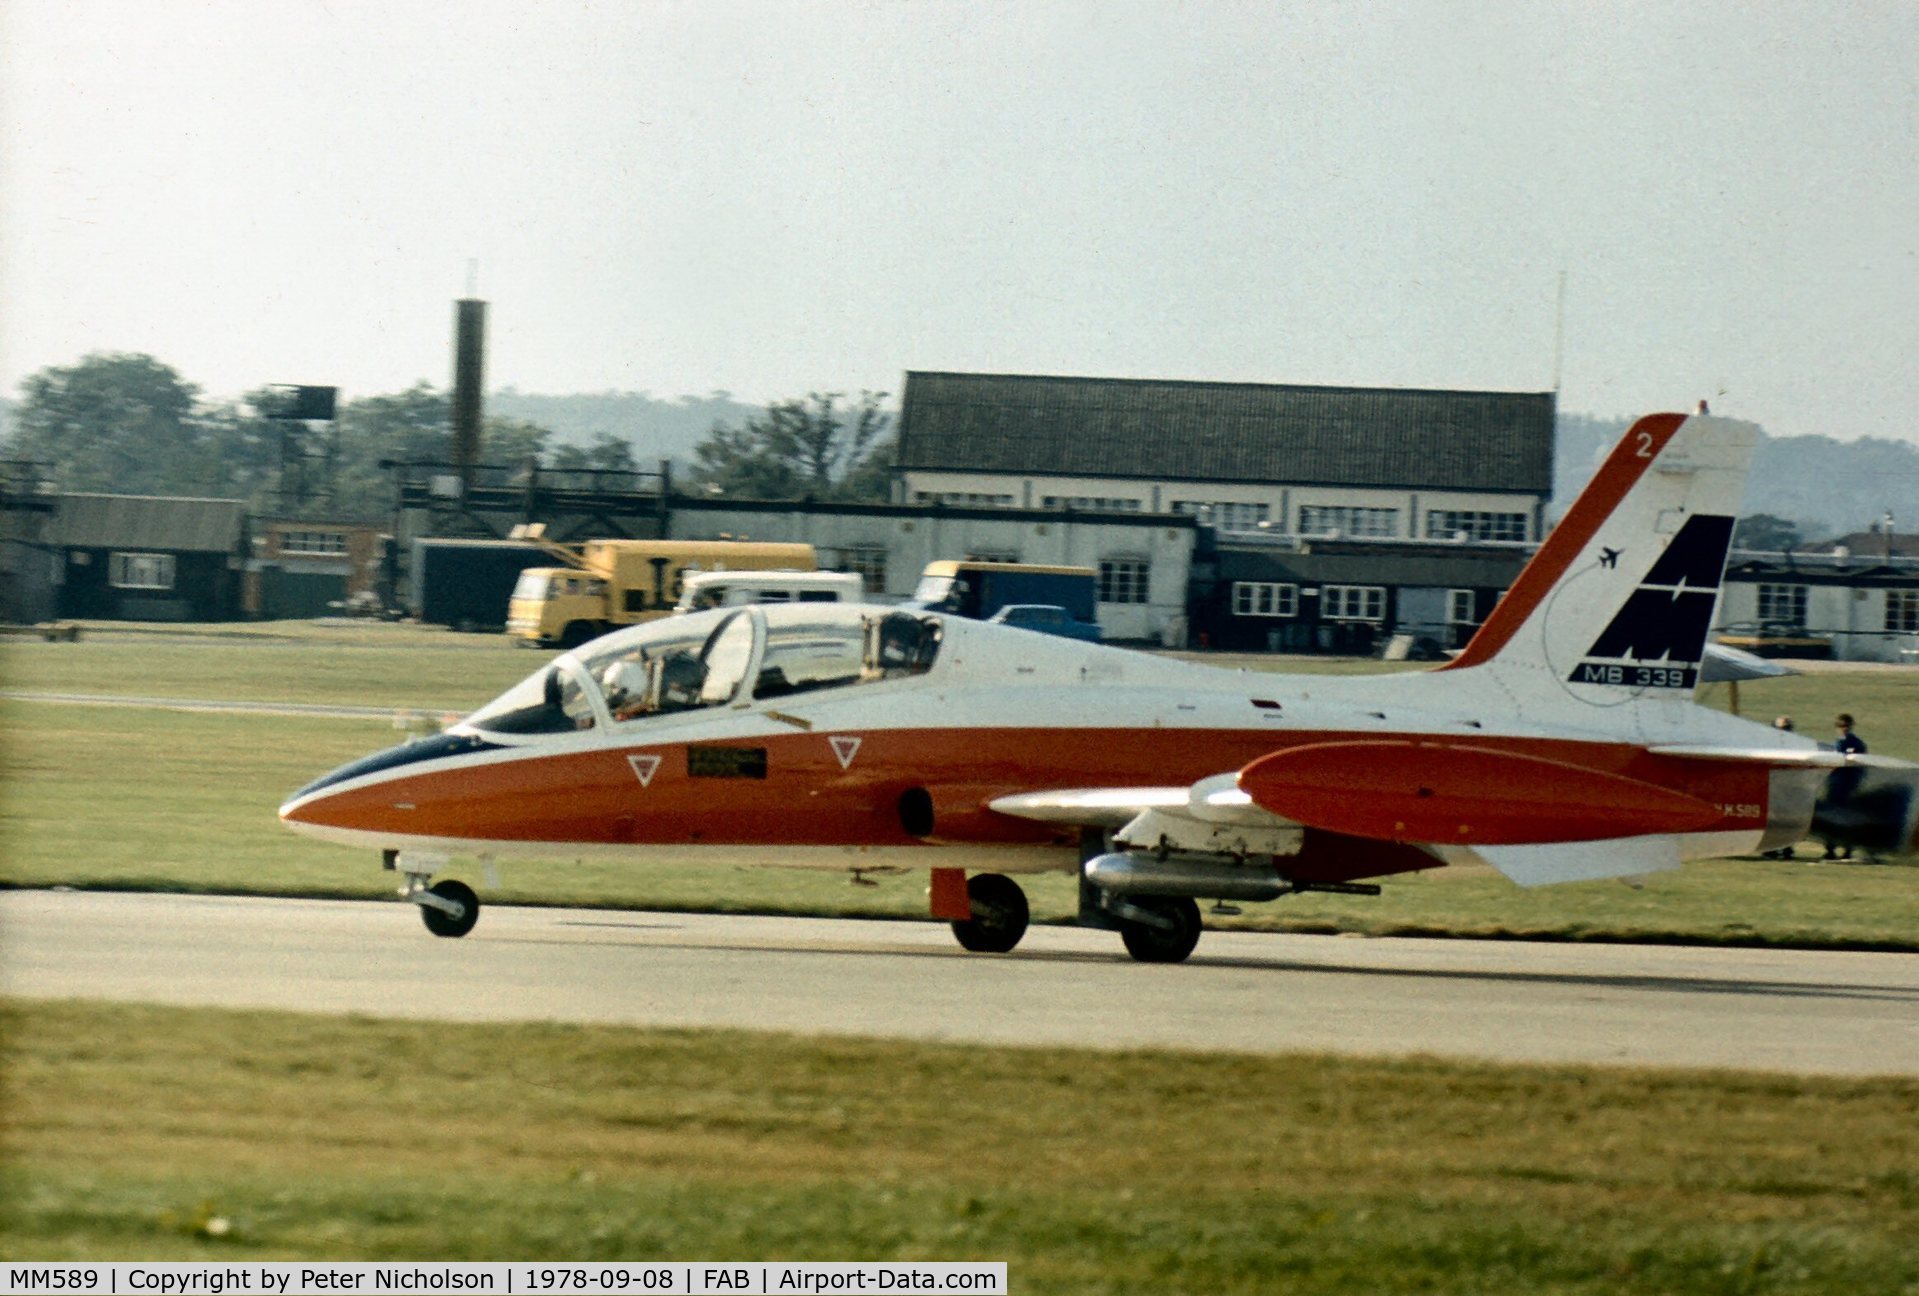 MM589, 1977 Aermacchi MB-339X C/N 6574/002, MB.339A with Italian Air Force serial MM589 on display at the 1978 Farnborough Airshow.